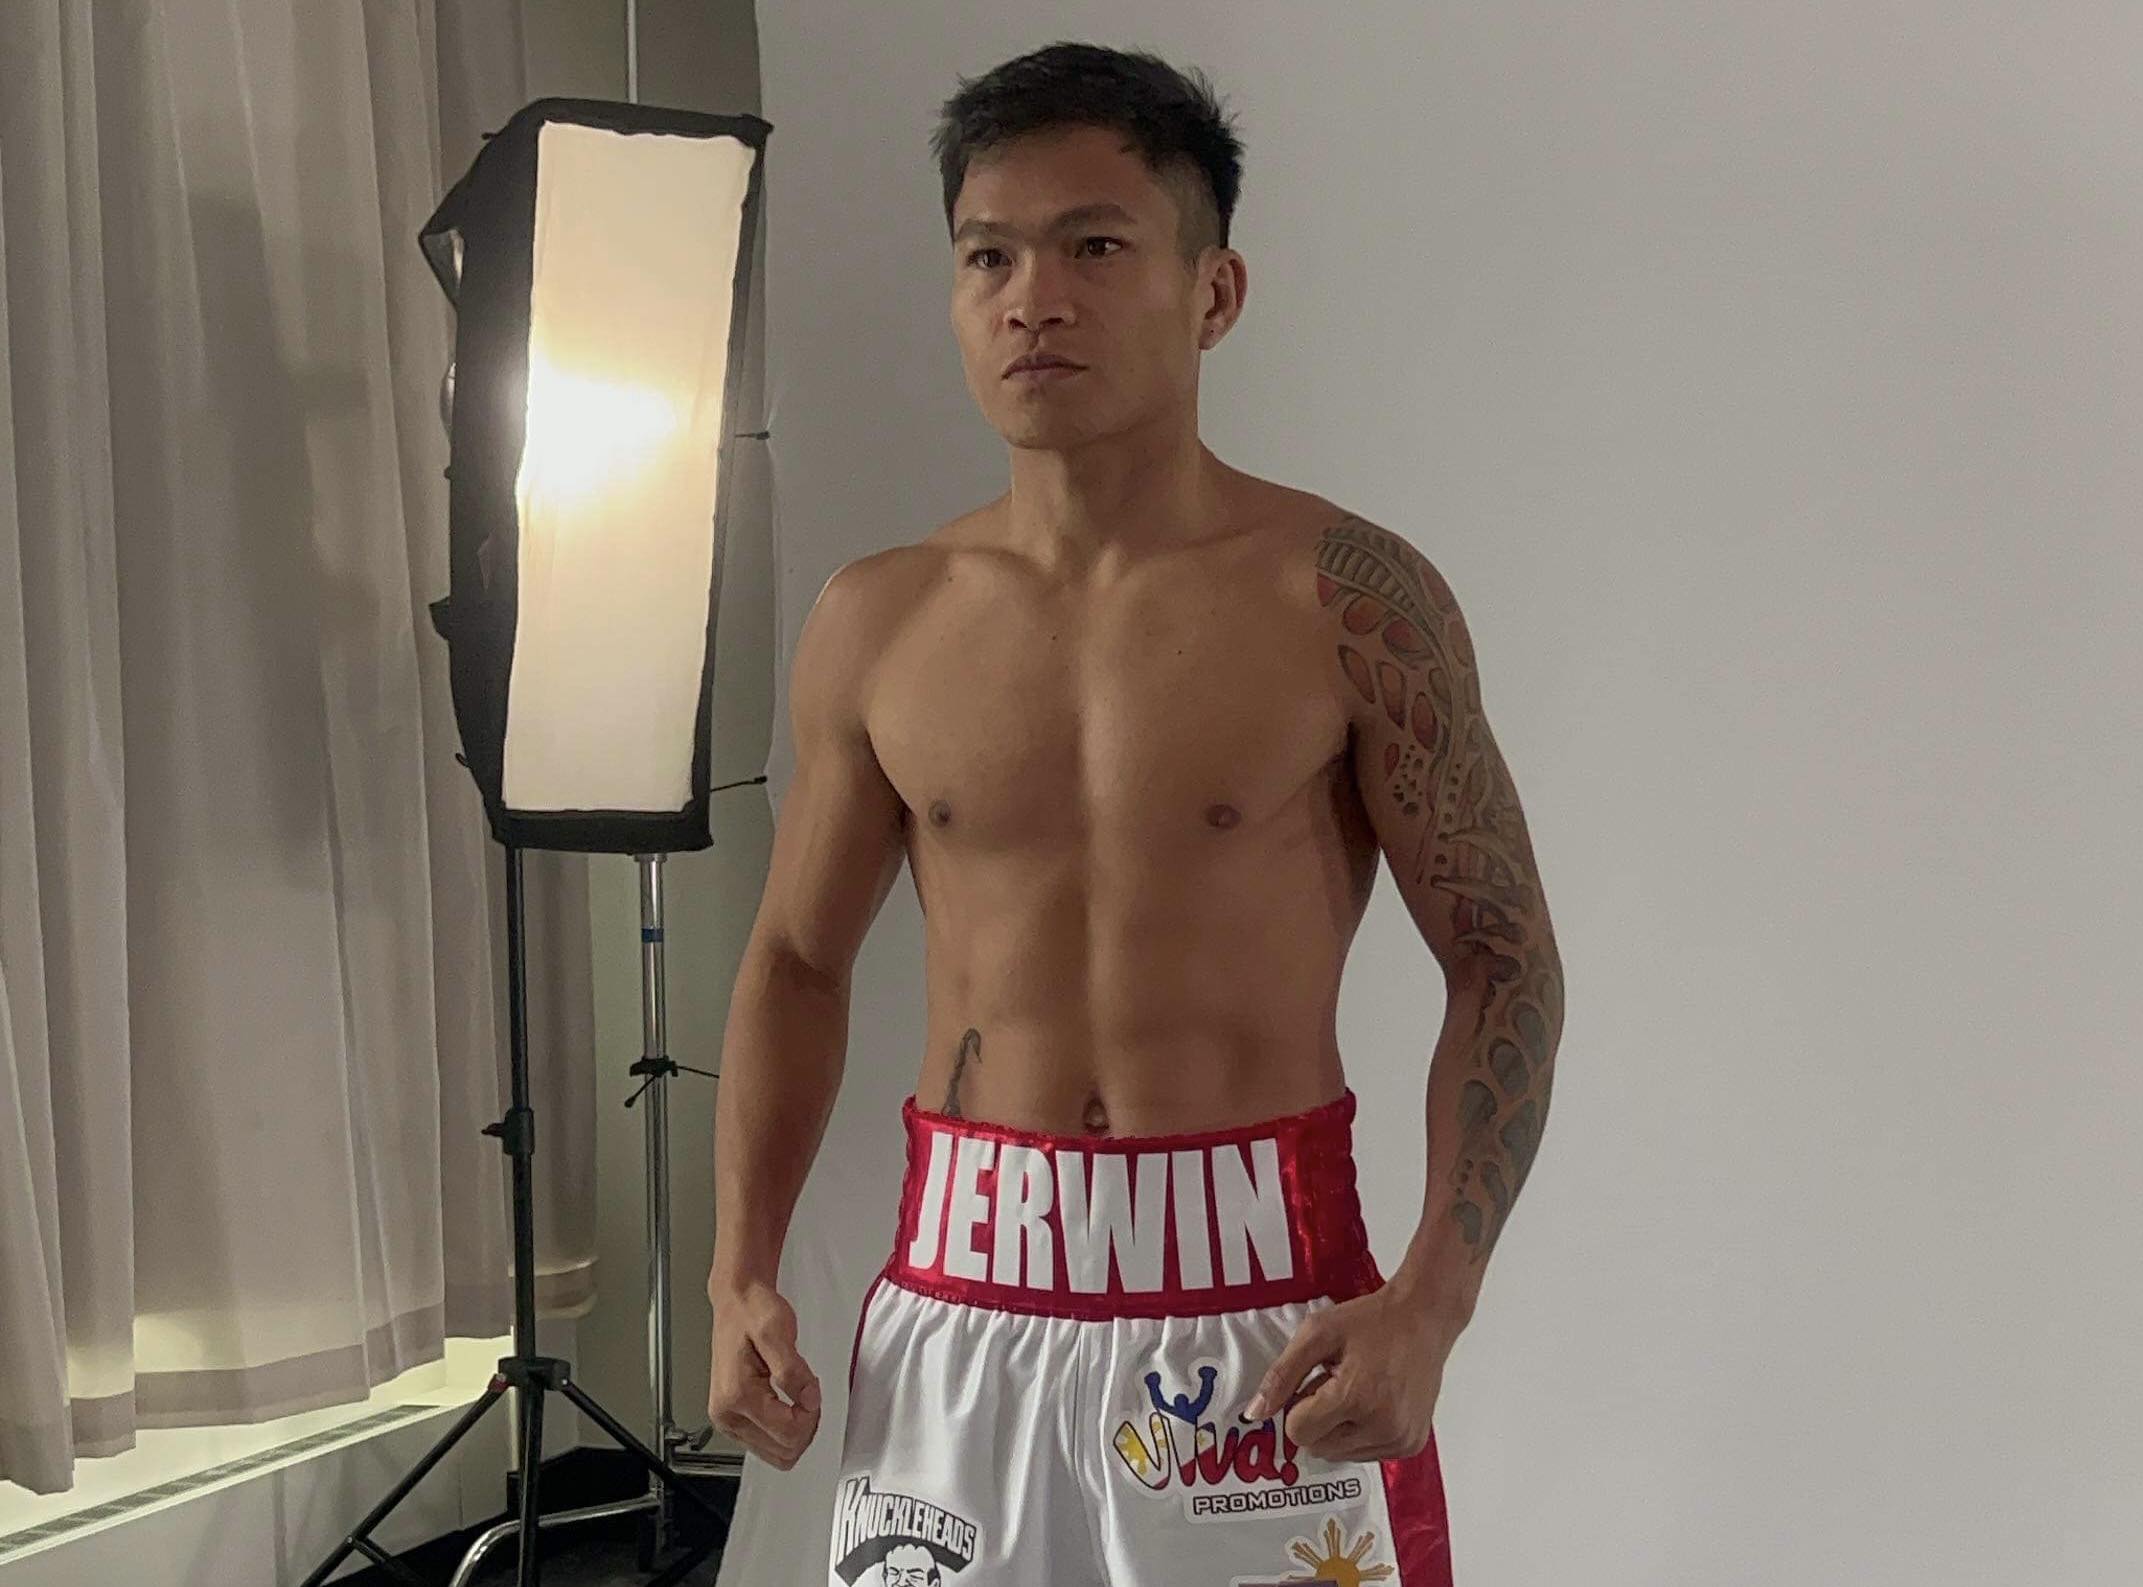 Title shot awaits Jerwin Ancajas if he gets past Wilner Soto